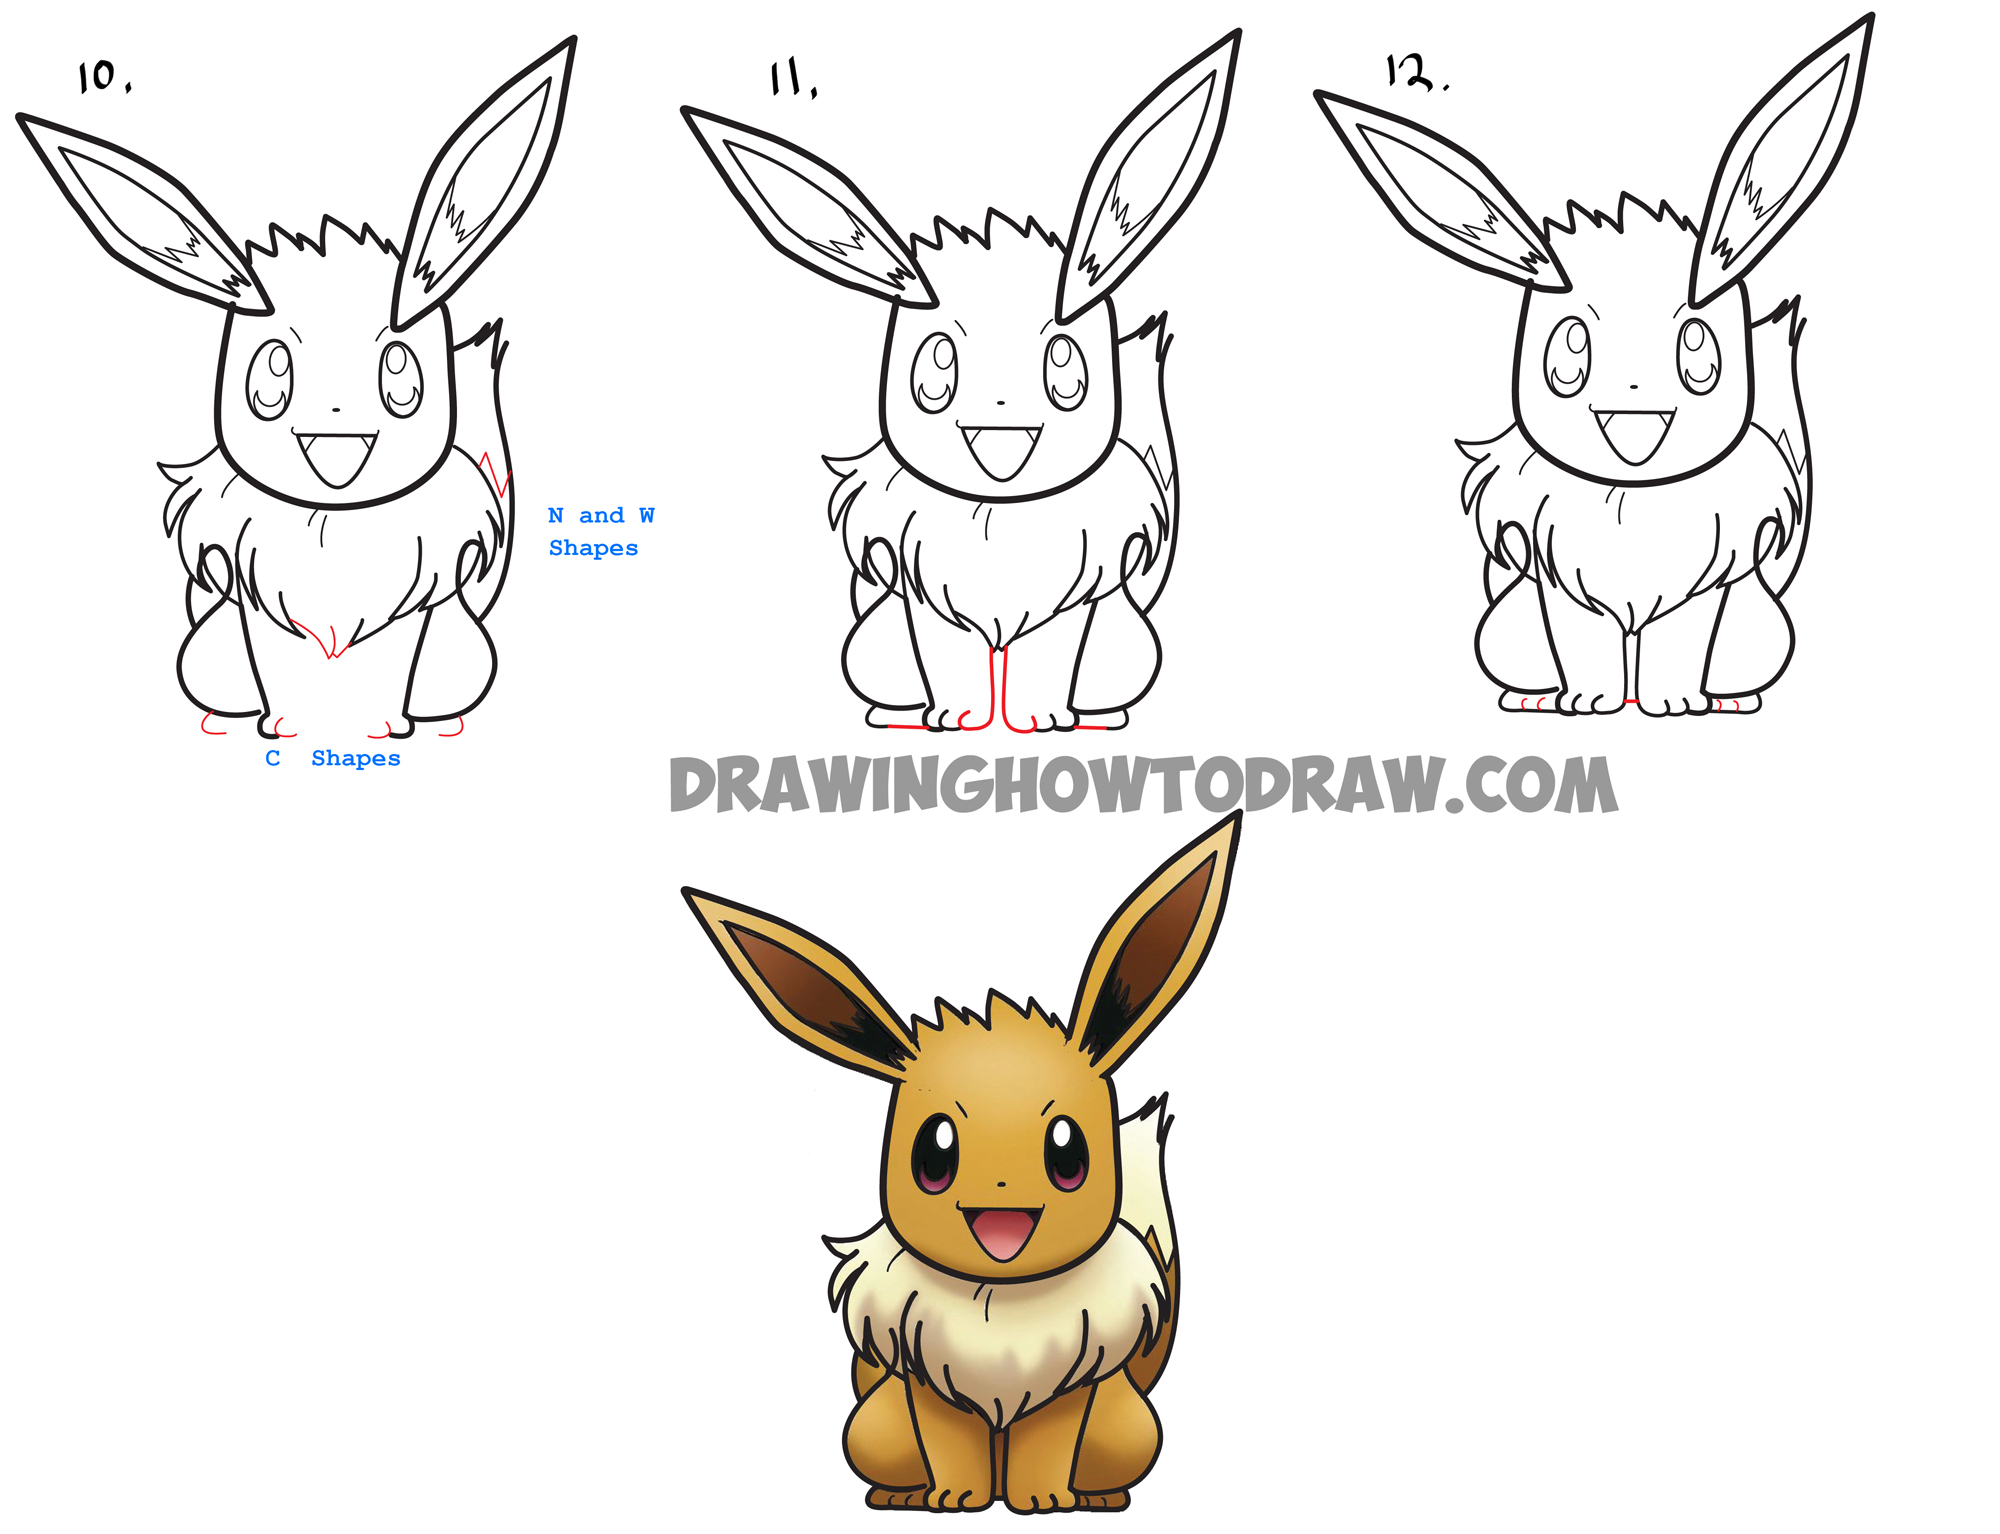 How to Draw Eevee from Pokemon with Easy Step by Step Drawing Tutorial